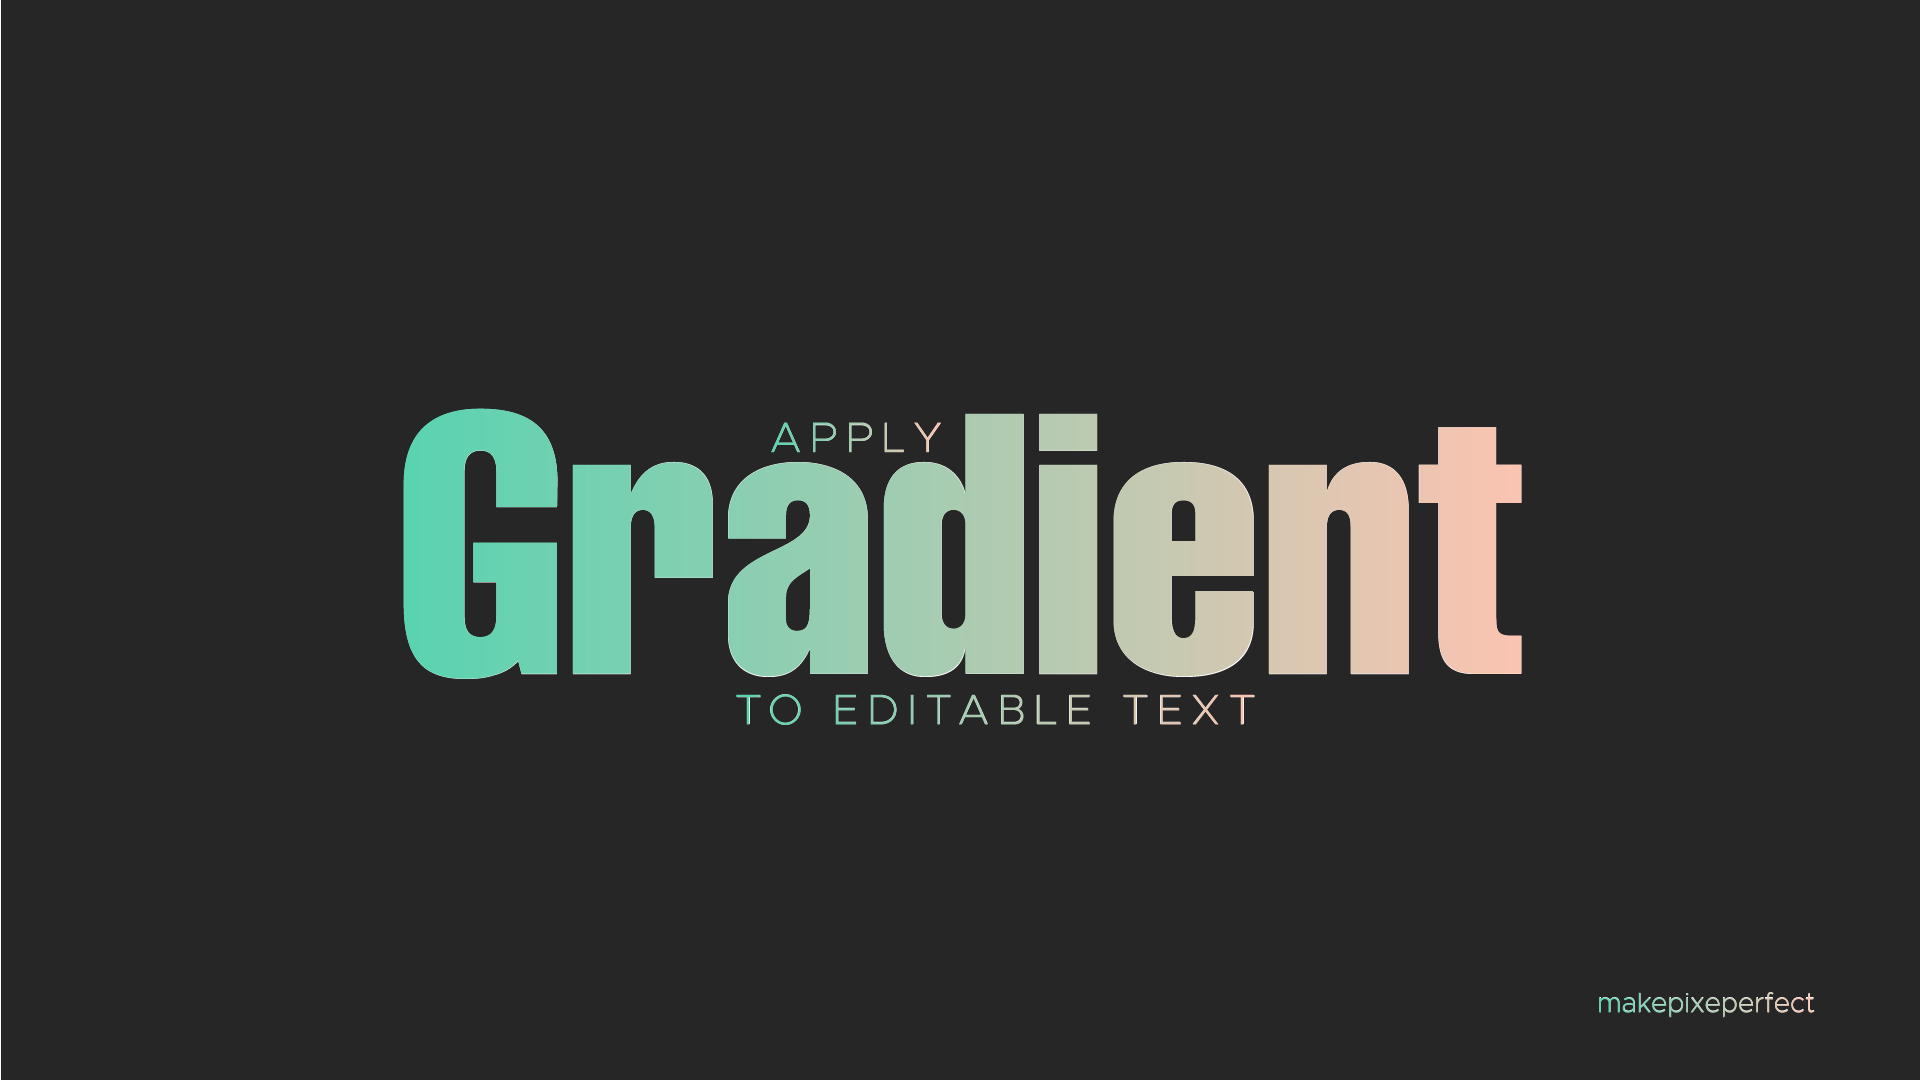 apply gradients to an editable text in Illustrator